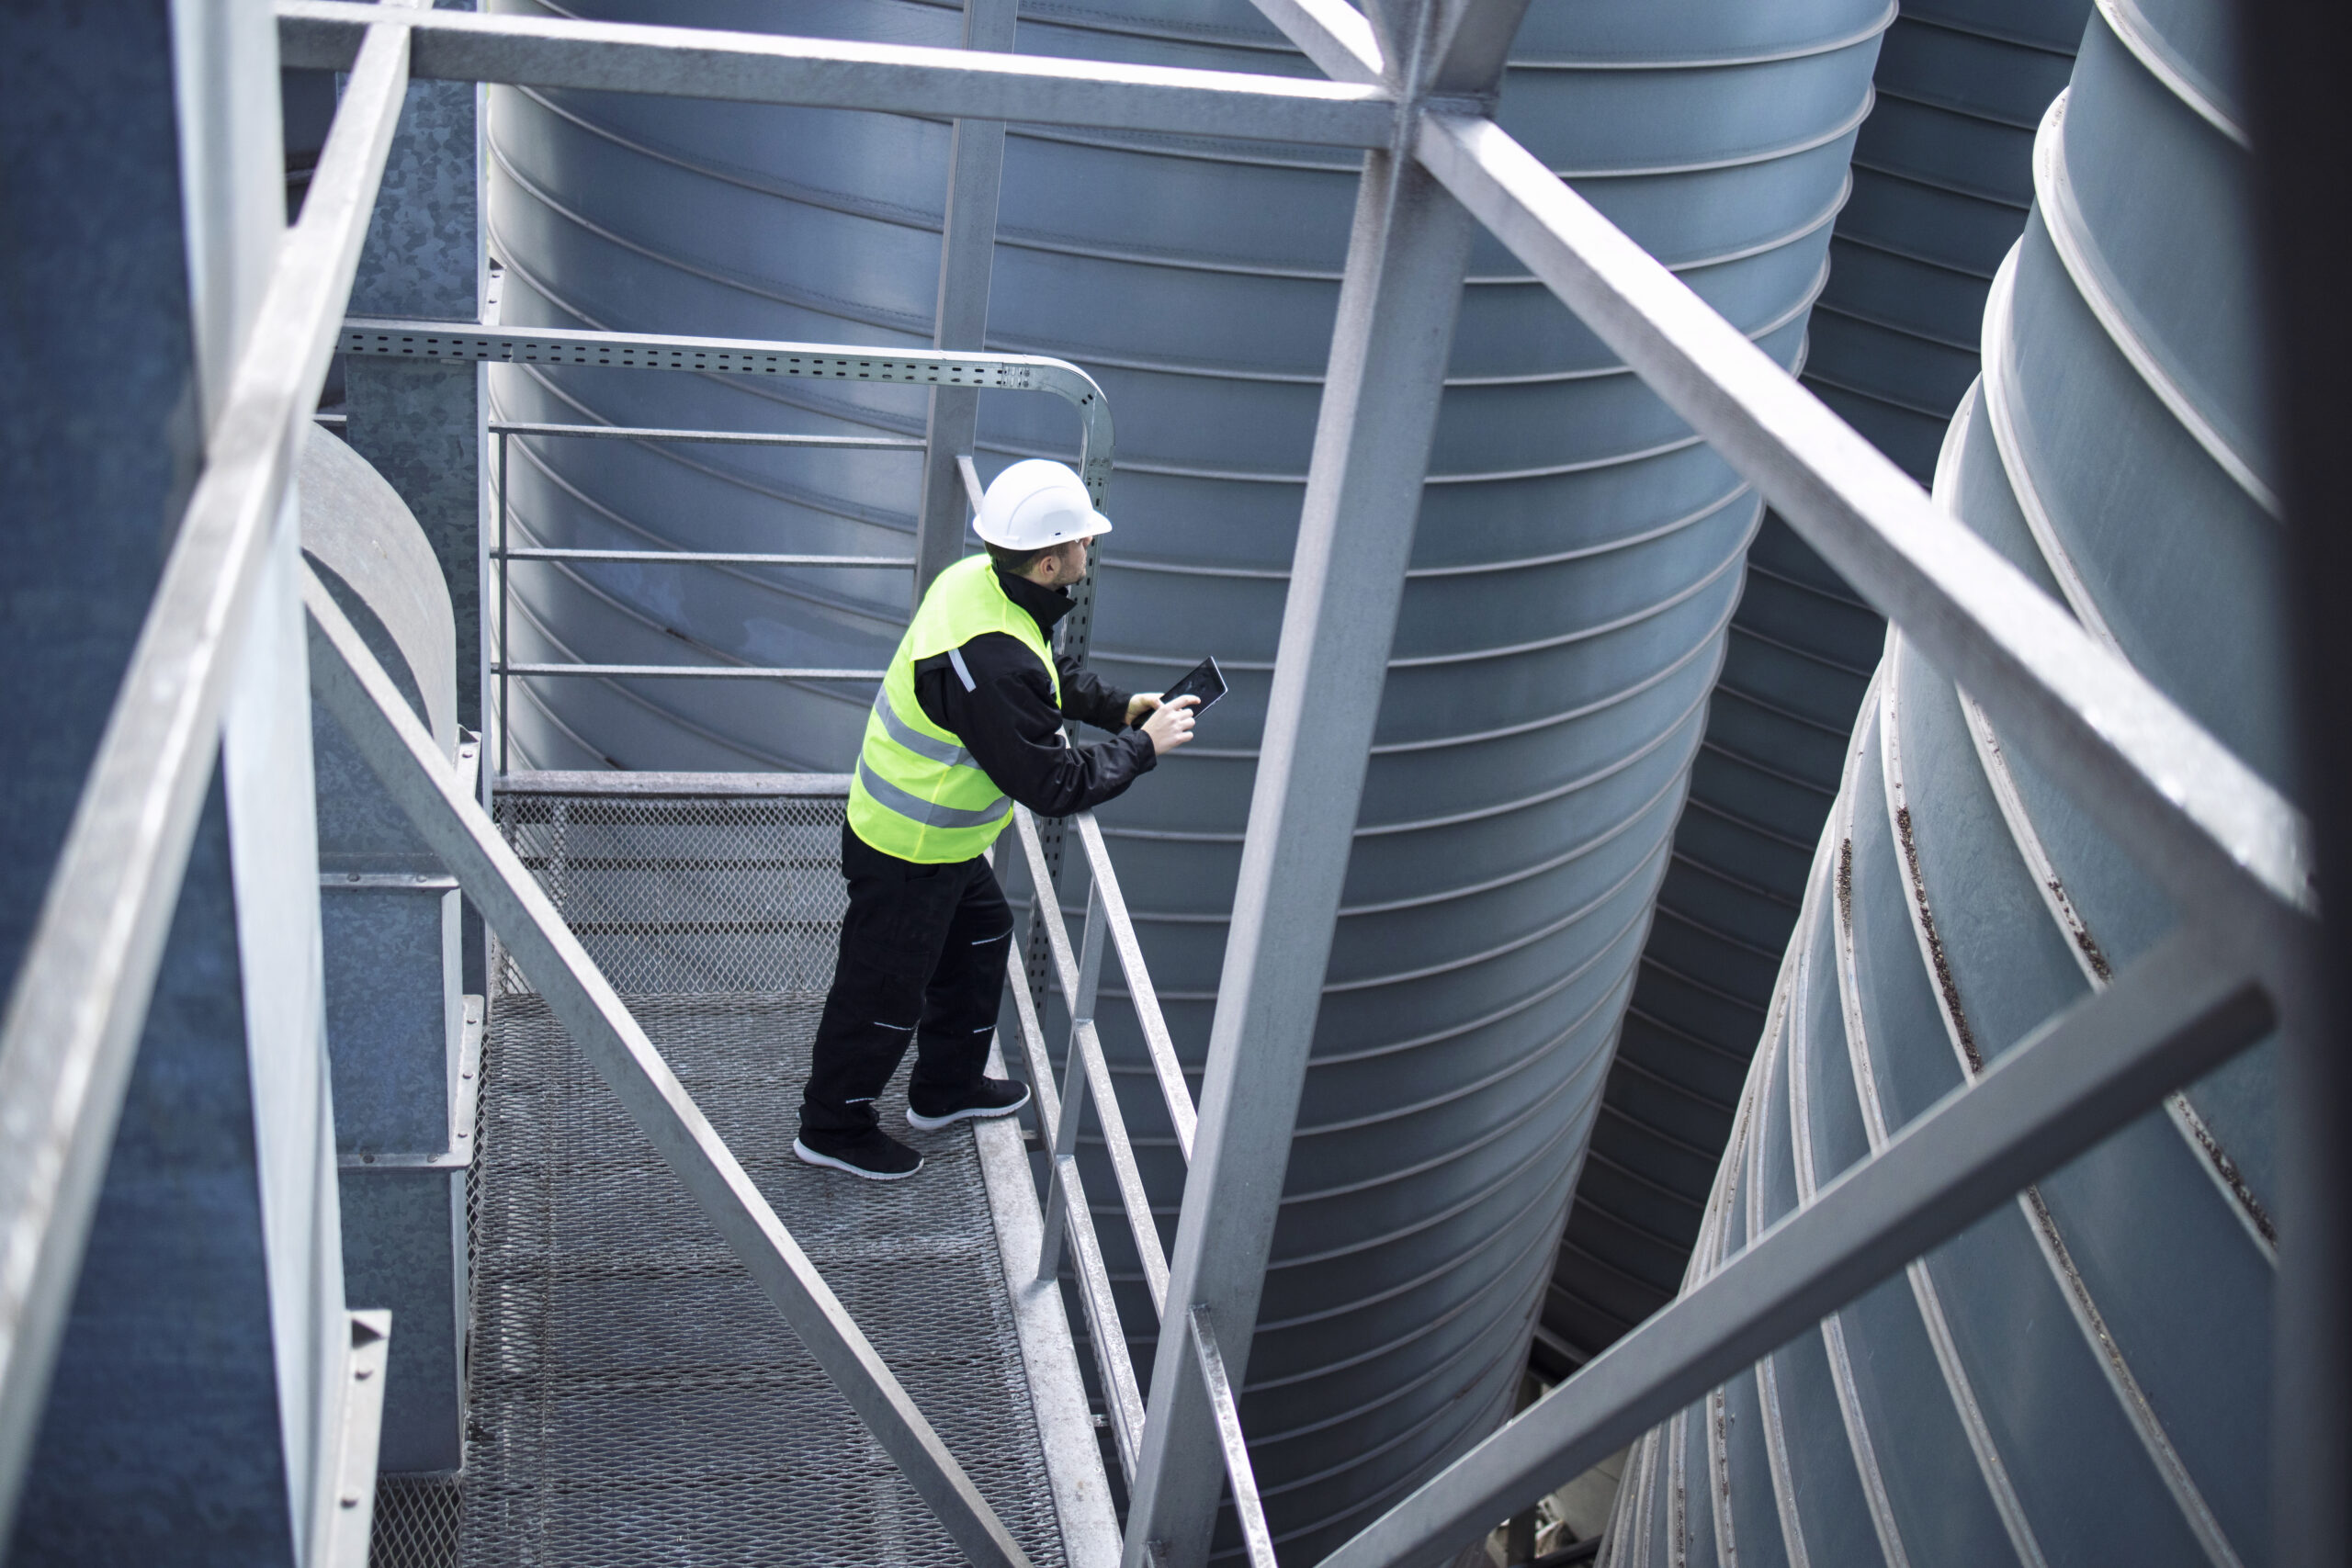 Factory silos worker standing on metal platform between industrial storage tanks and looking at tablet about food production.